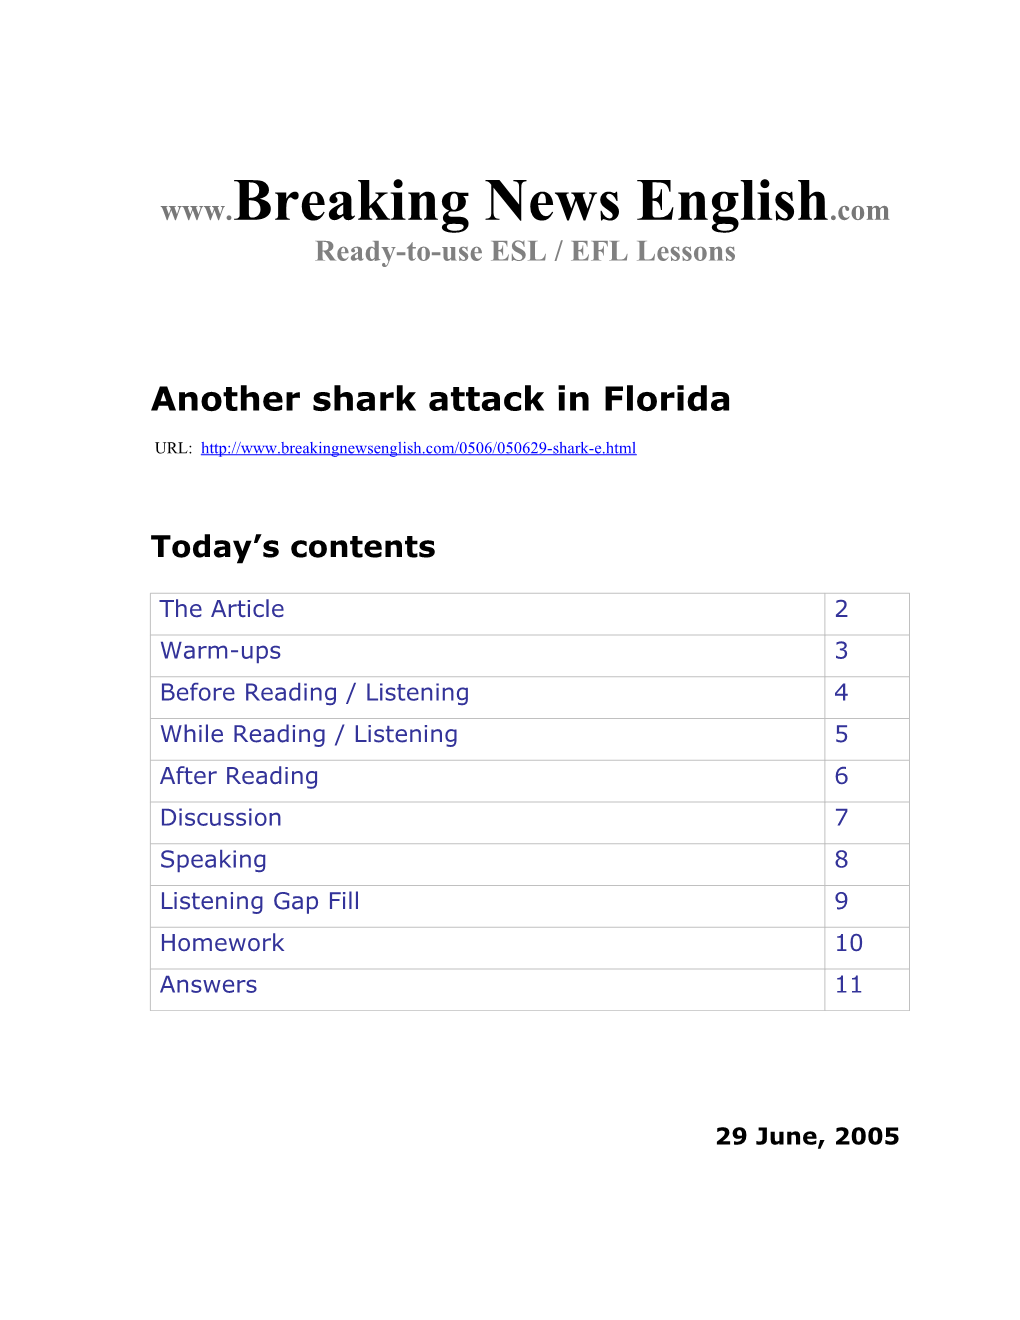 Another Shark Attack in Florida